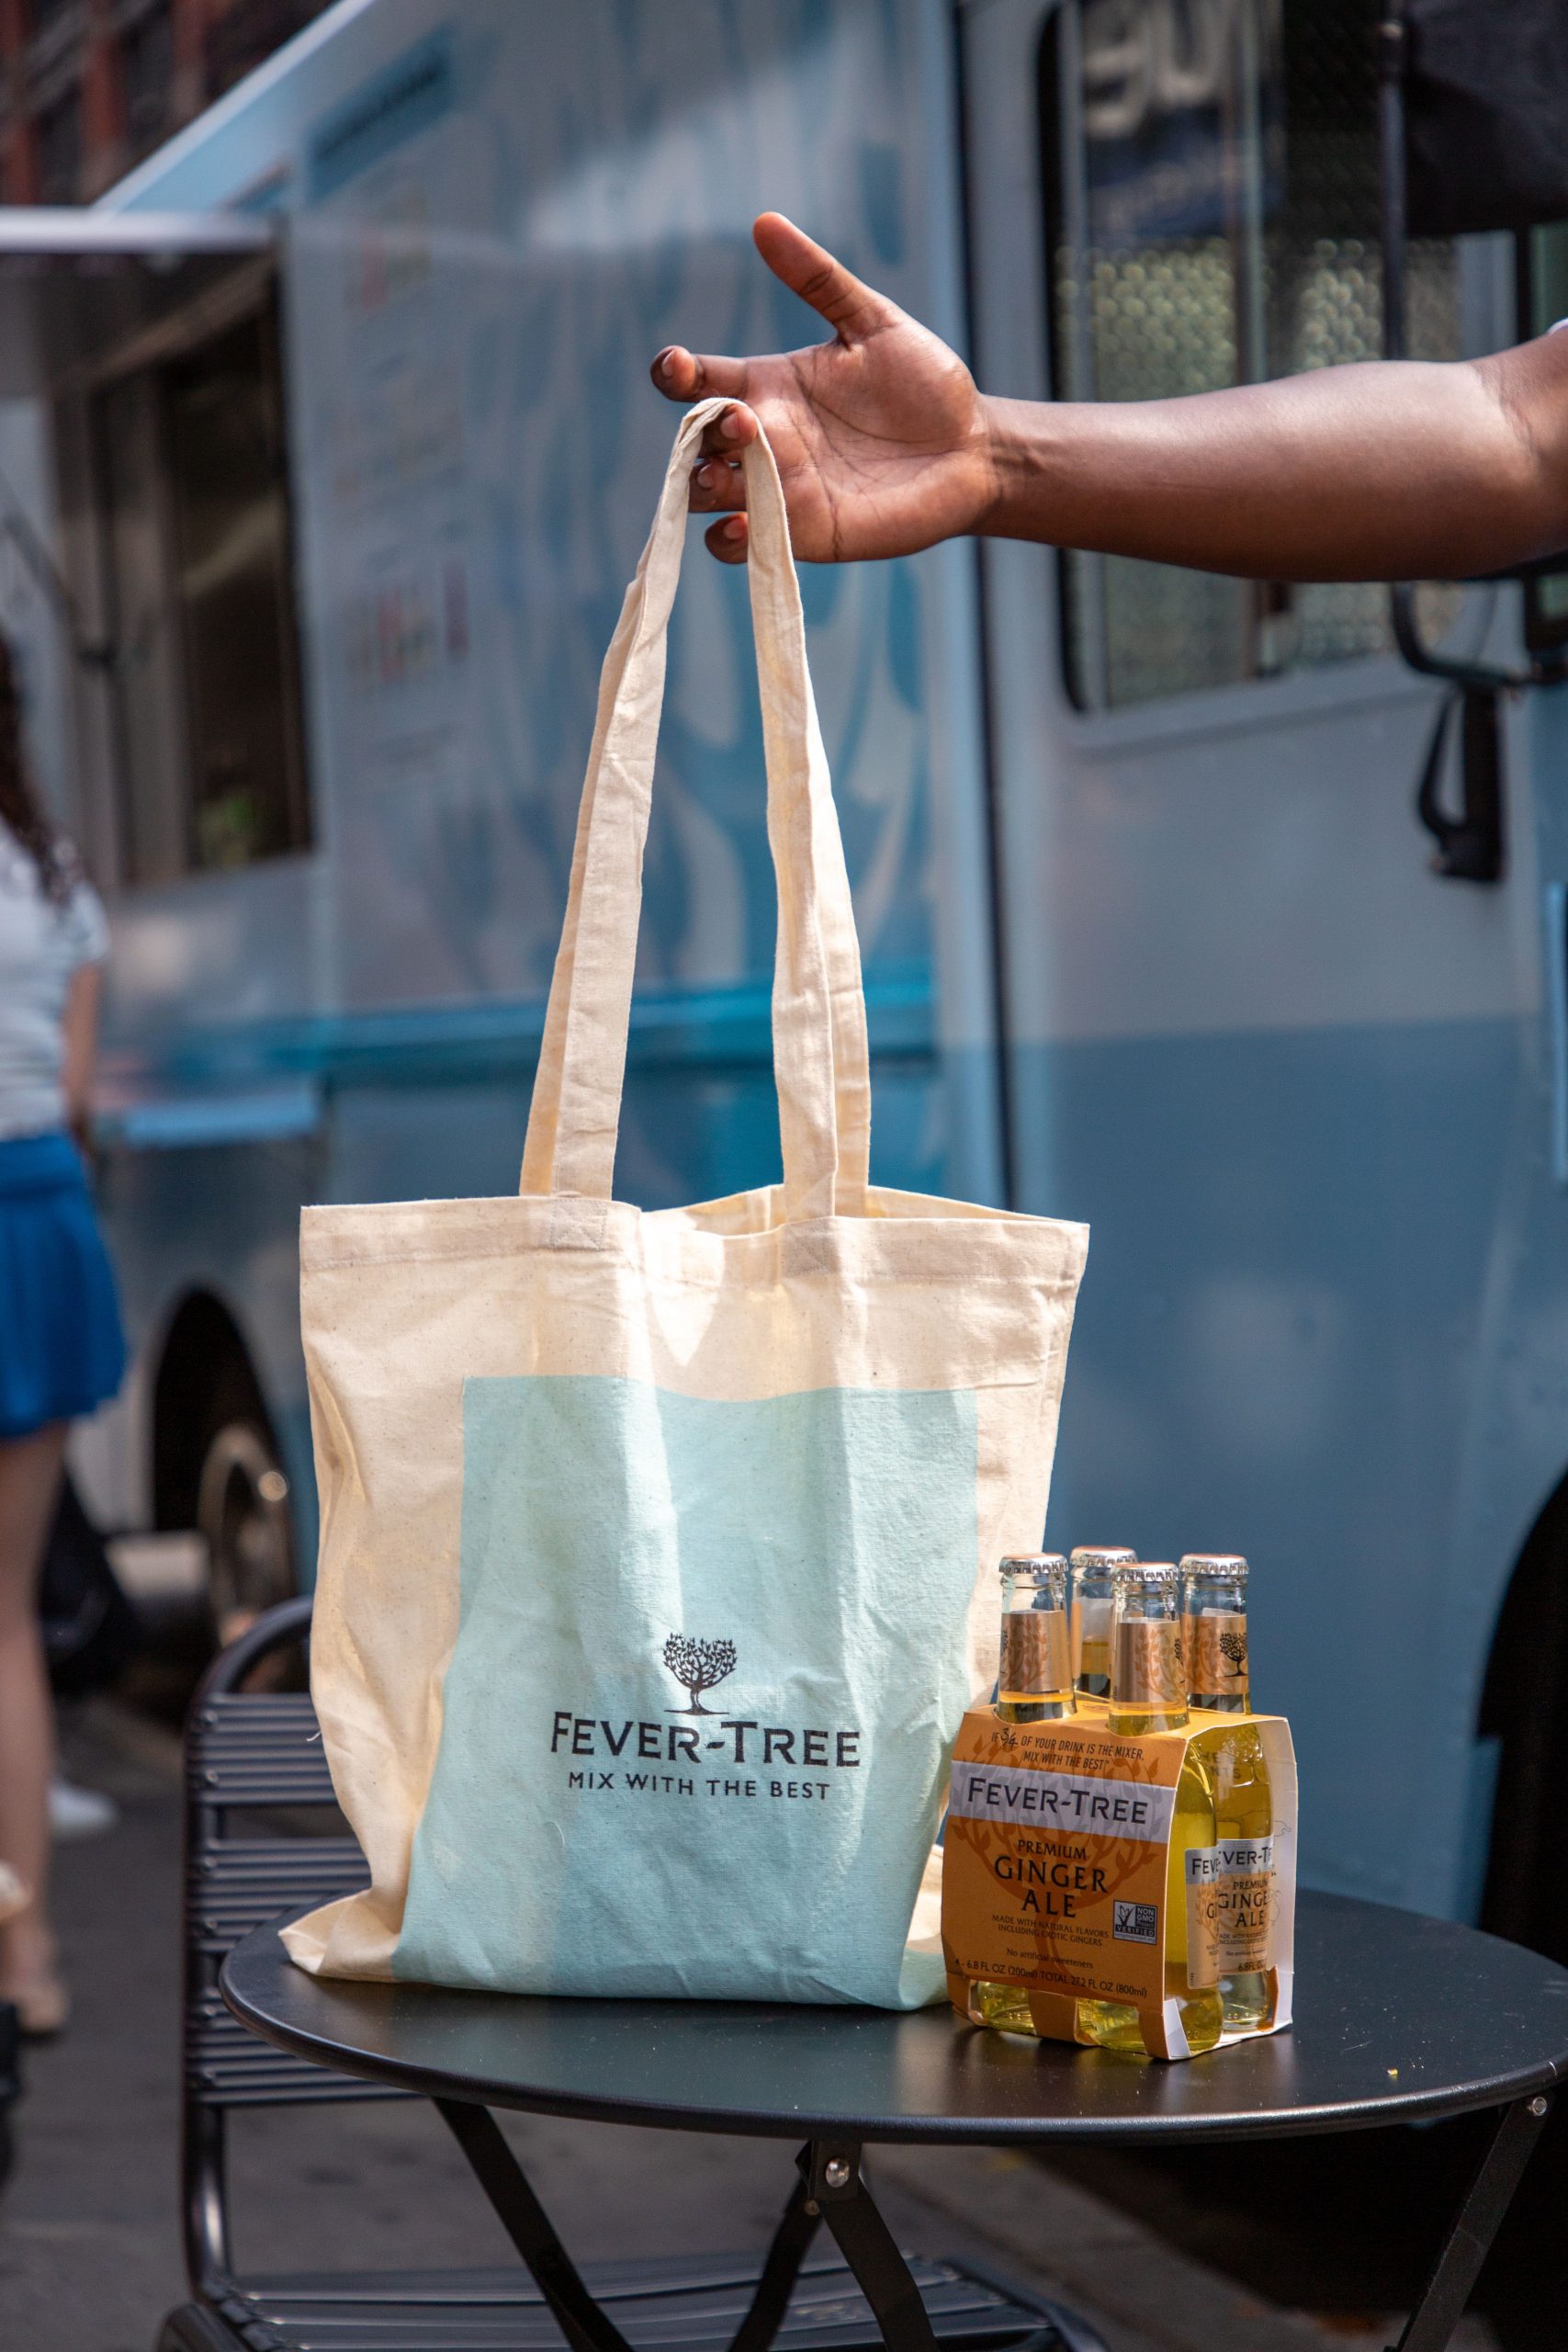 Fever-Tree Branded Tote And Ginger Ale